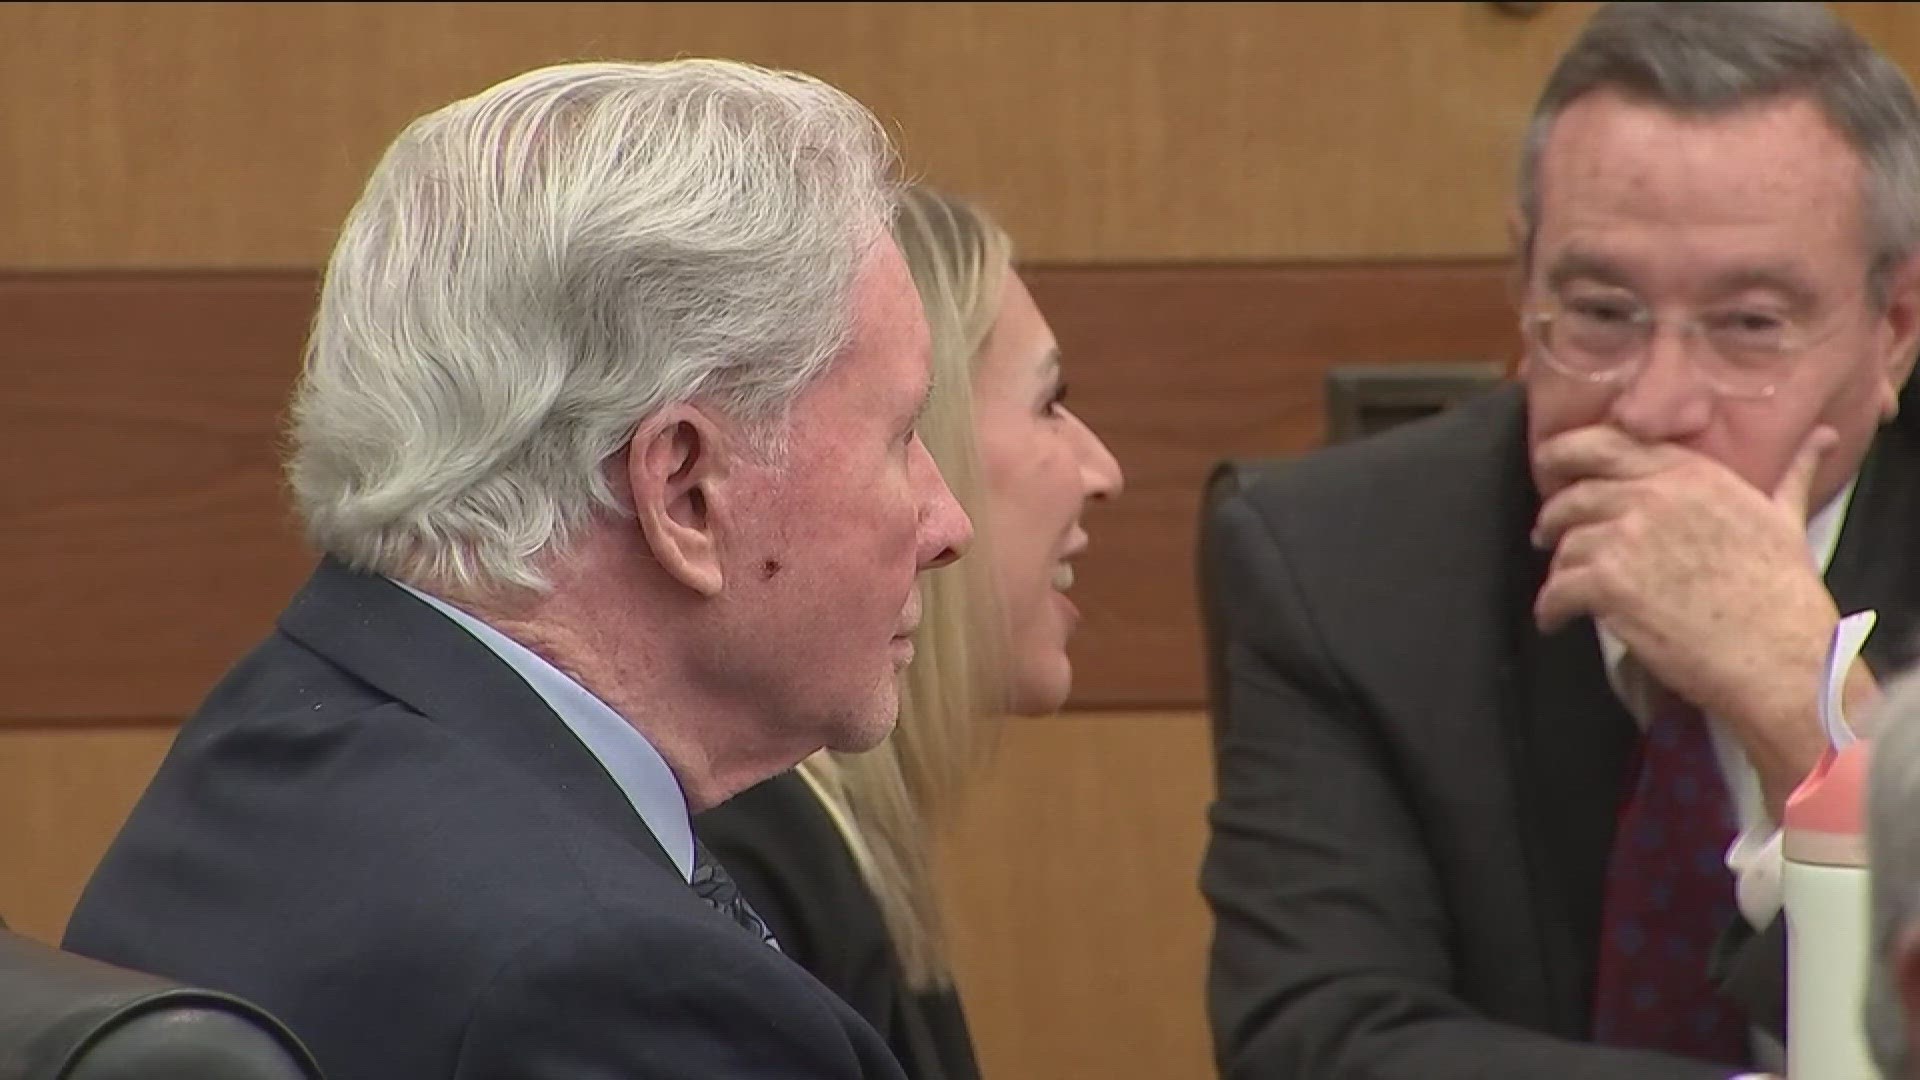 Judge Robert C.I. McBurney issued an order Tuesday precluding prosecutors from arguing McIver intended to kill his wife in 2018.